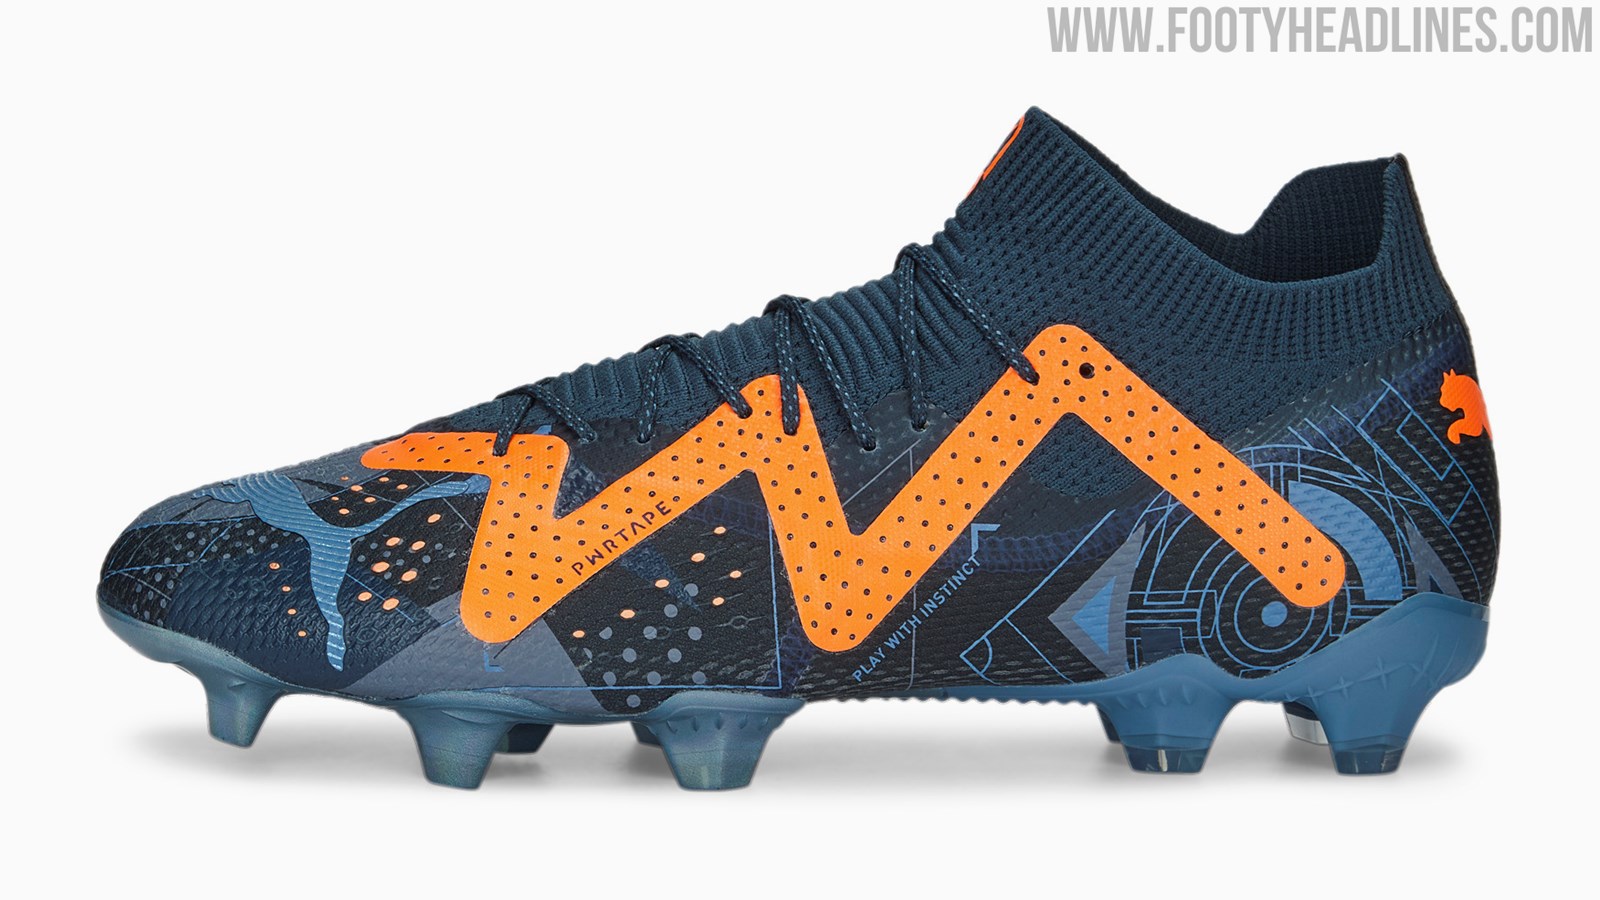 Sangrar Actualizar molécula All-New Puma Future Ultimate Boots Released - Worn by Neymar - Footy  Headlines